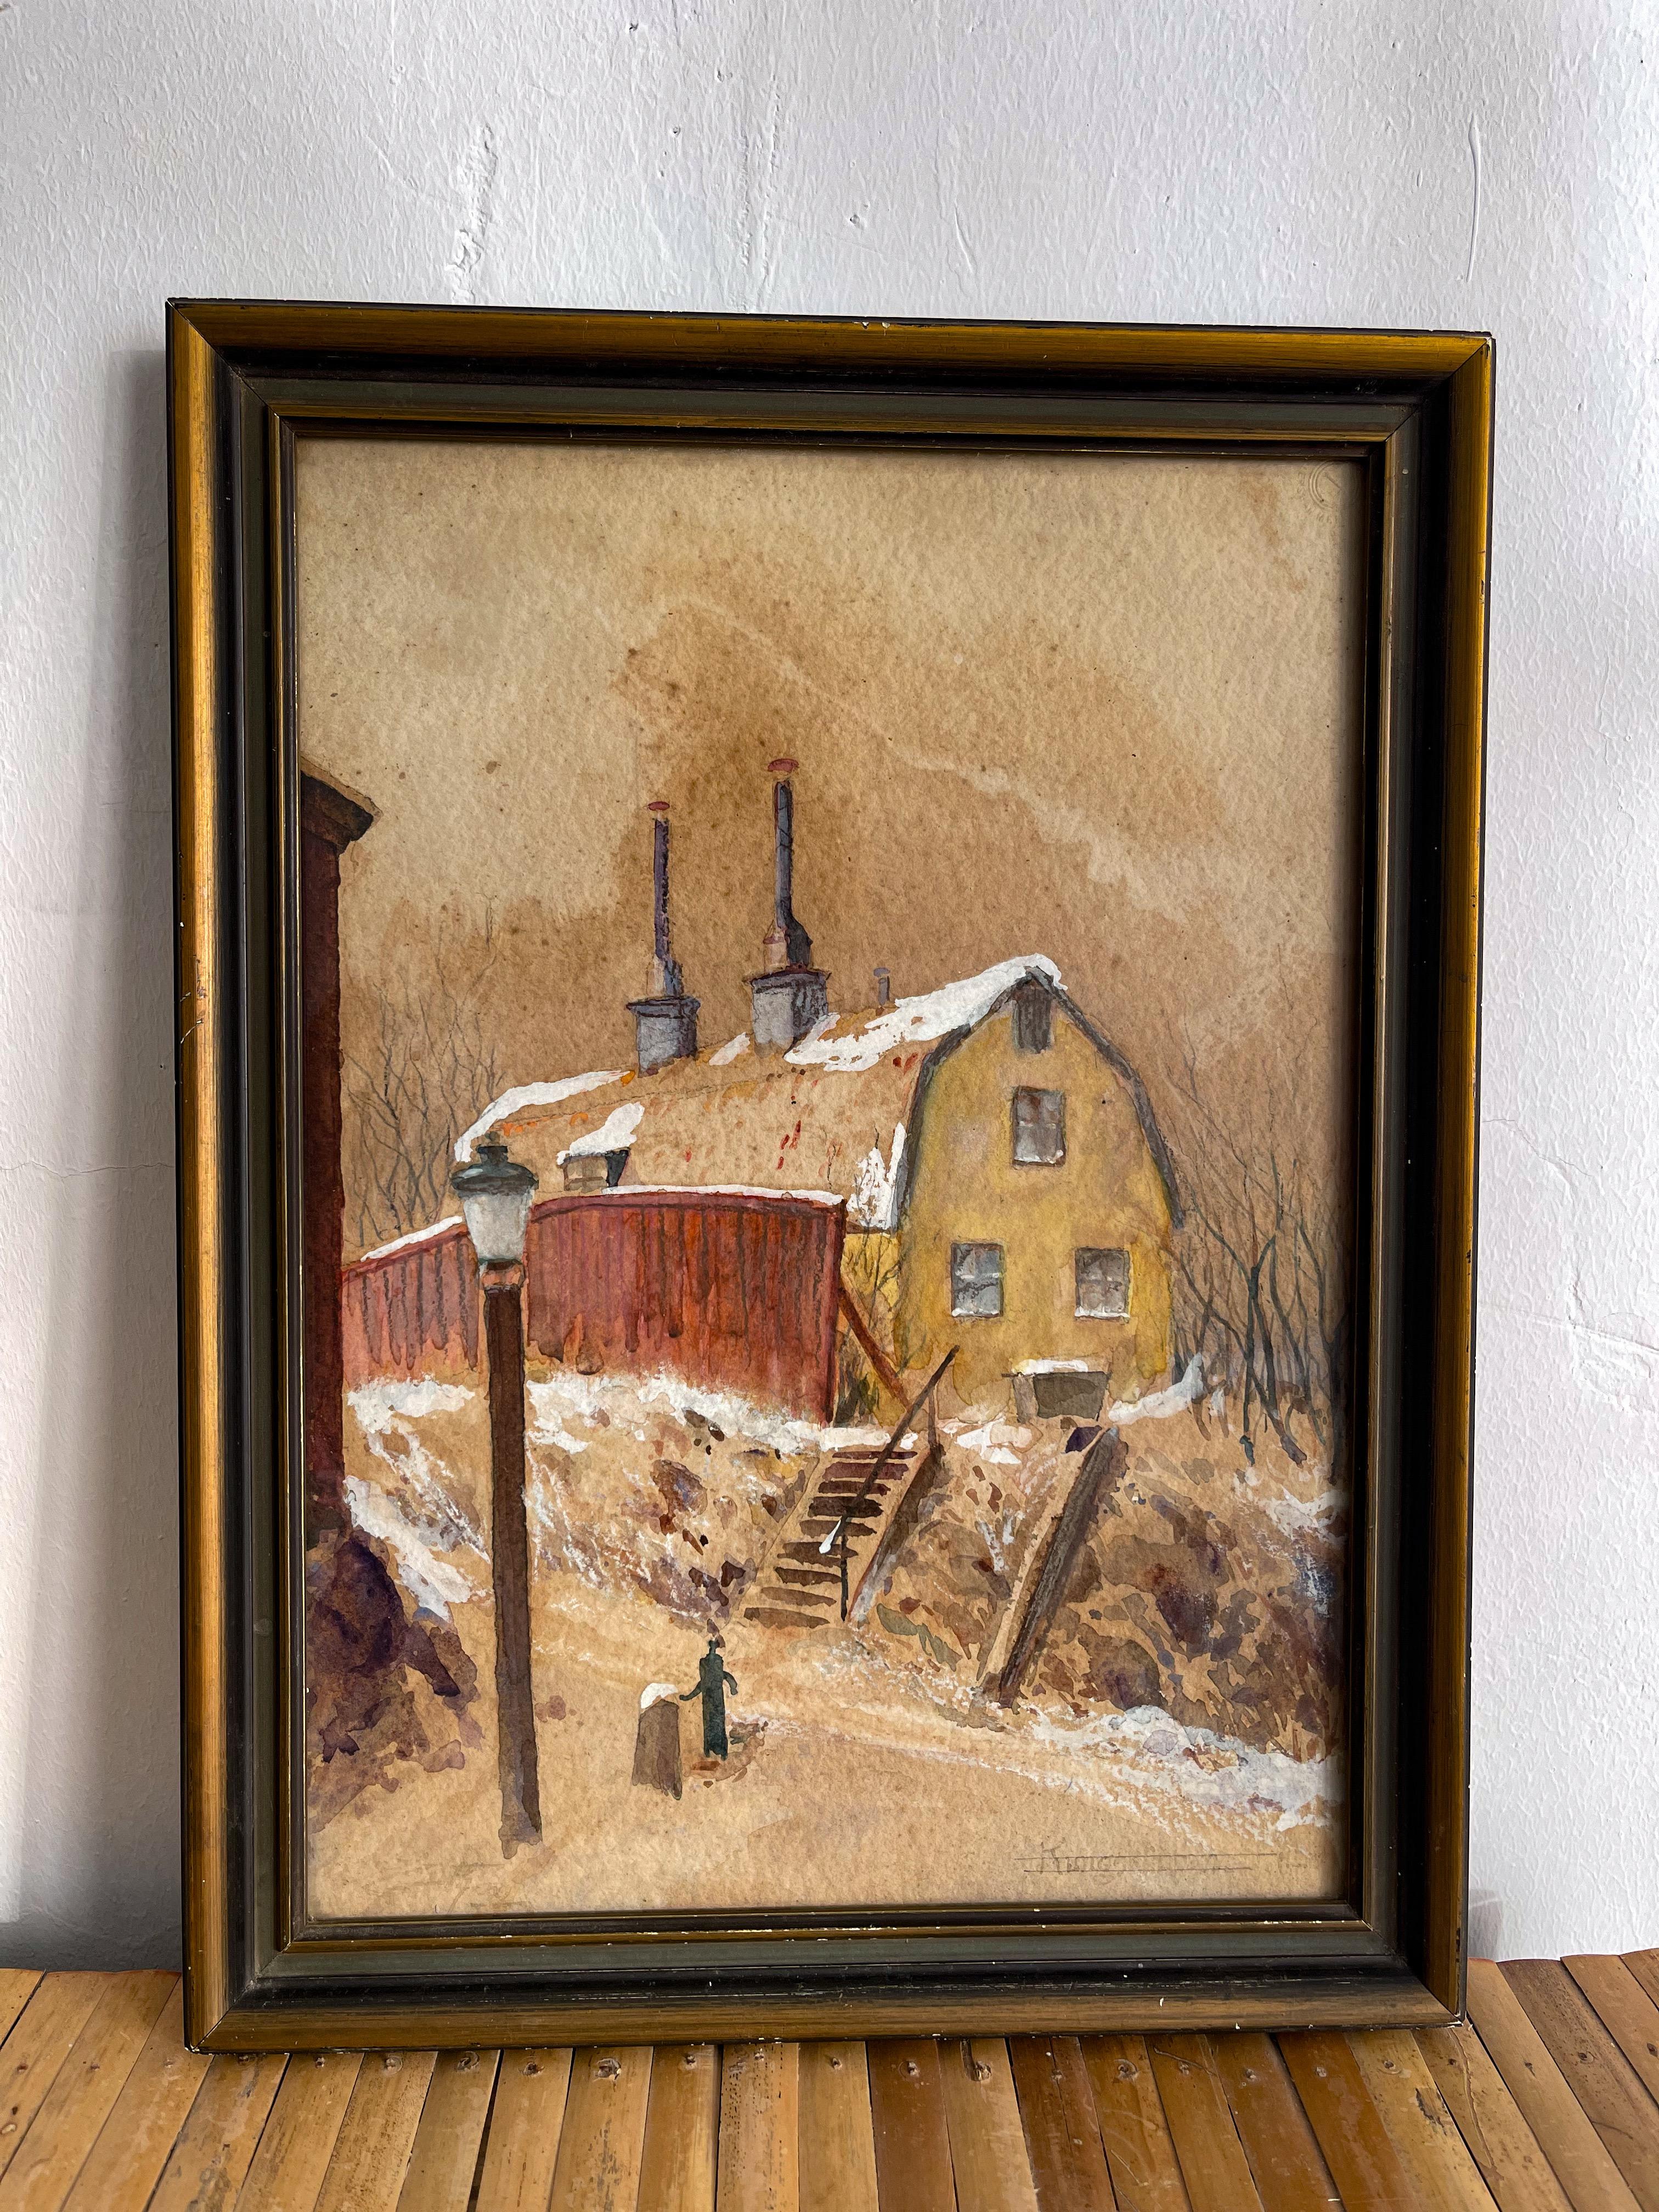 This Swedish folk art watercolour farm house located in Kingsklippan, Sweden on winter scene is a unique and timeless piece of art. Crafted with an aged brown tone, the painting has a stunning textured finish. The details of the cottage house on a